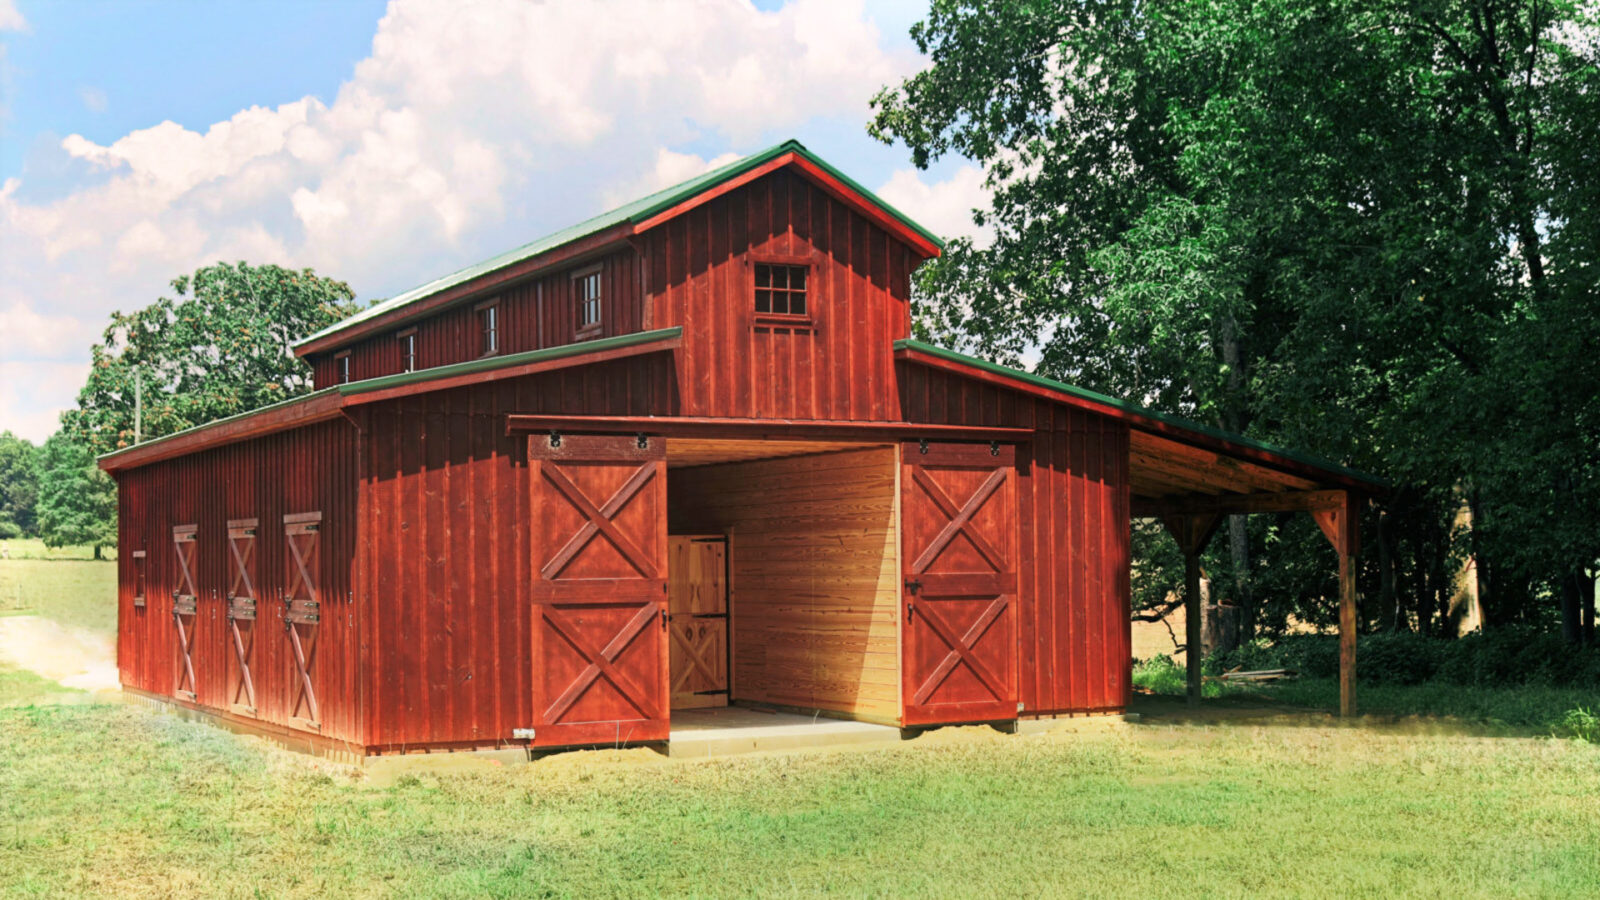 A Monitor horse barn styles on the field.